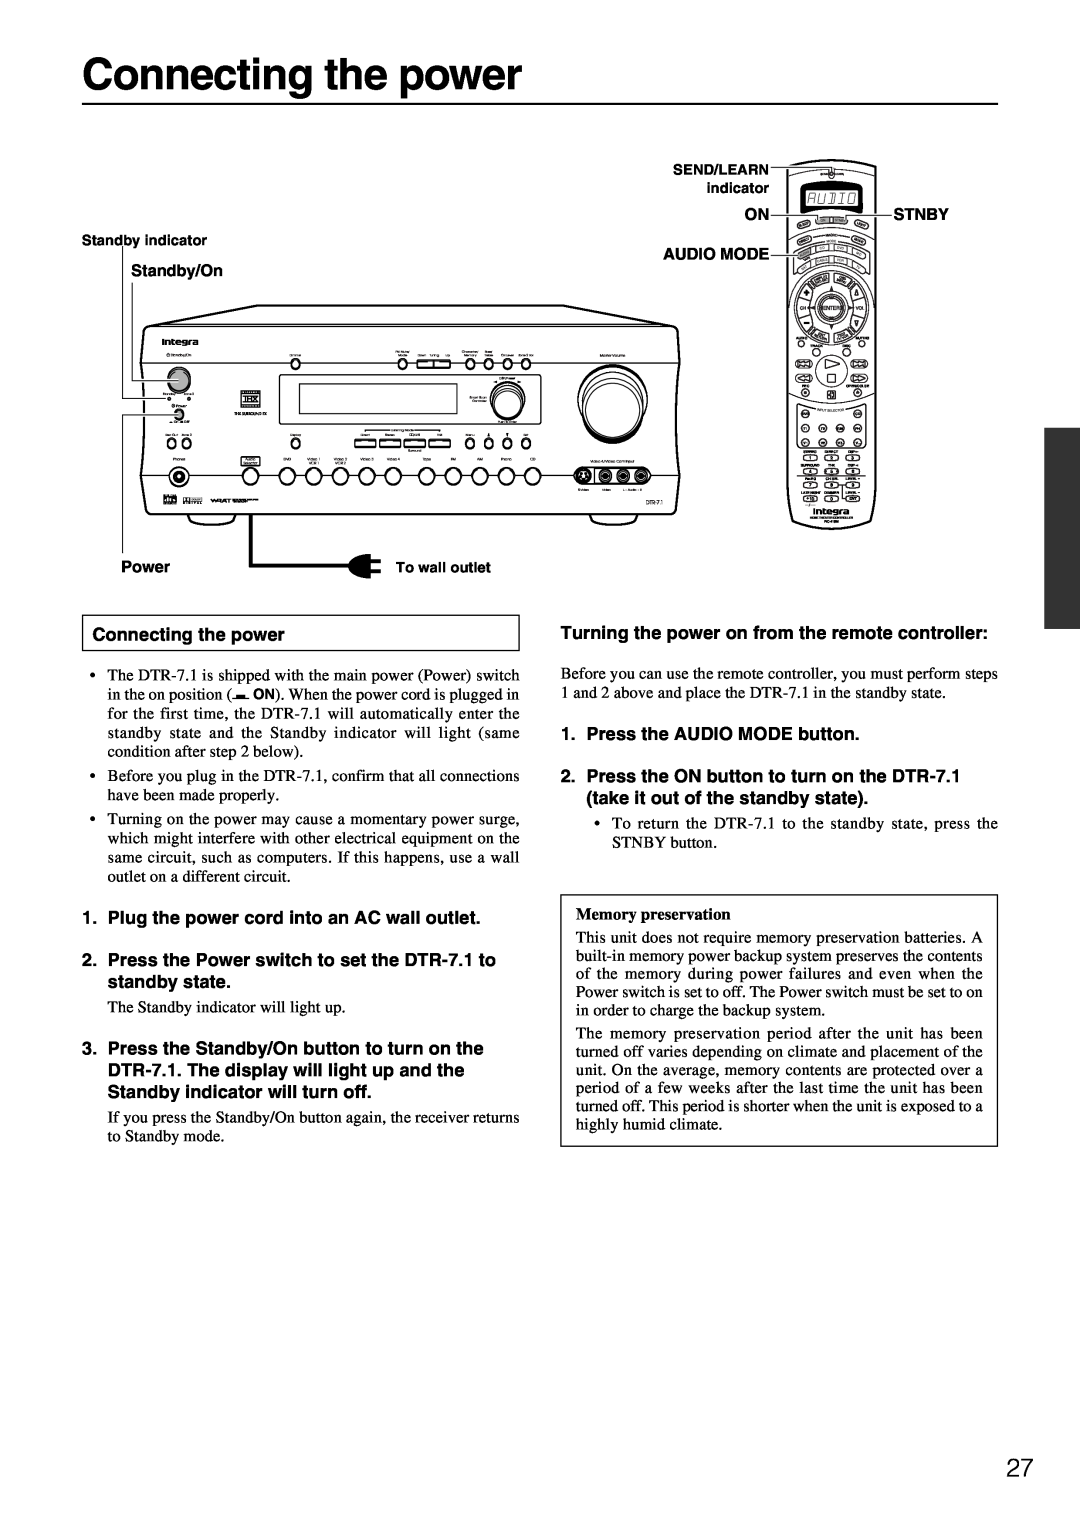 Integra DTR-7.1 appendix Connecting the power, Plug the power cord into an AC wall outlet, Press the AUDIO MODE button 